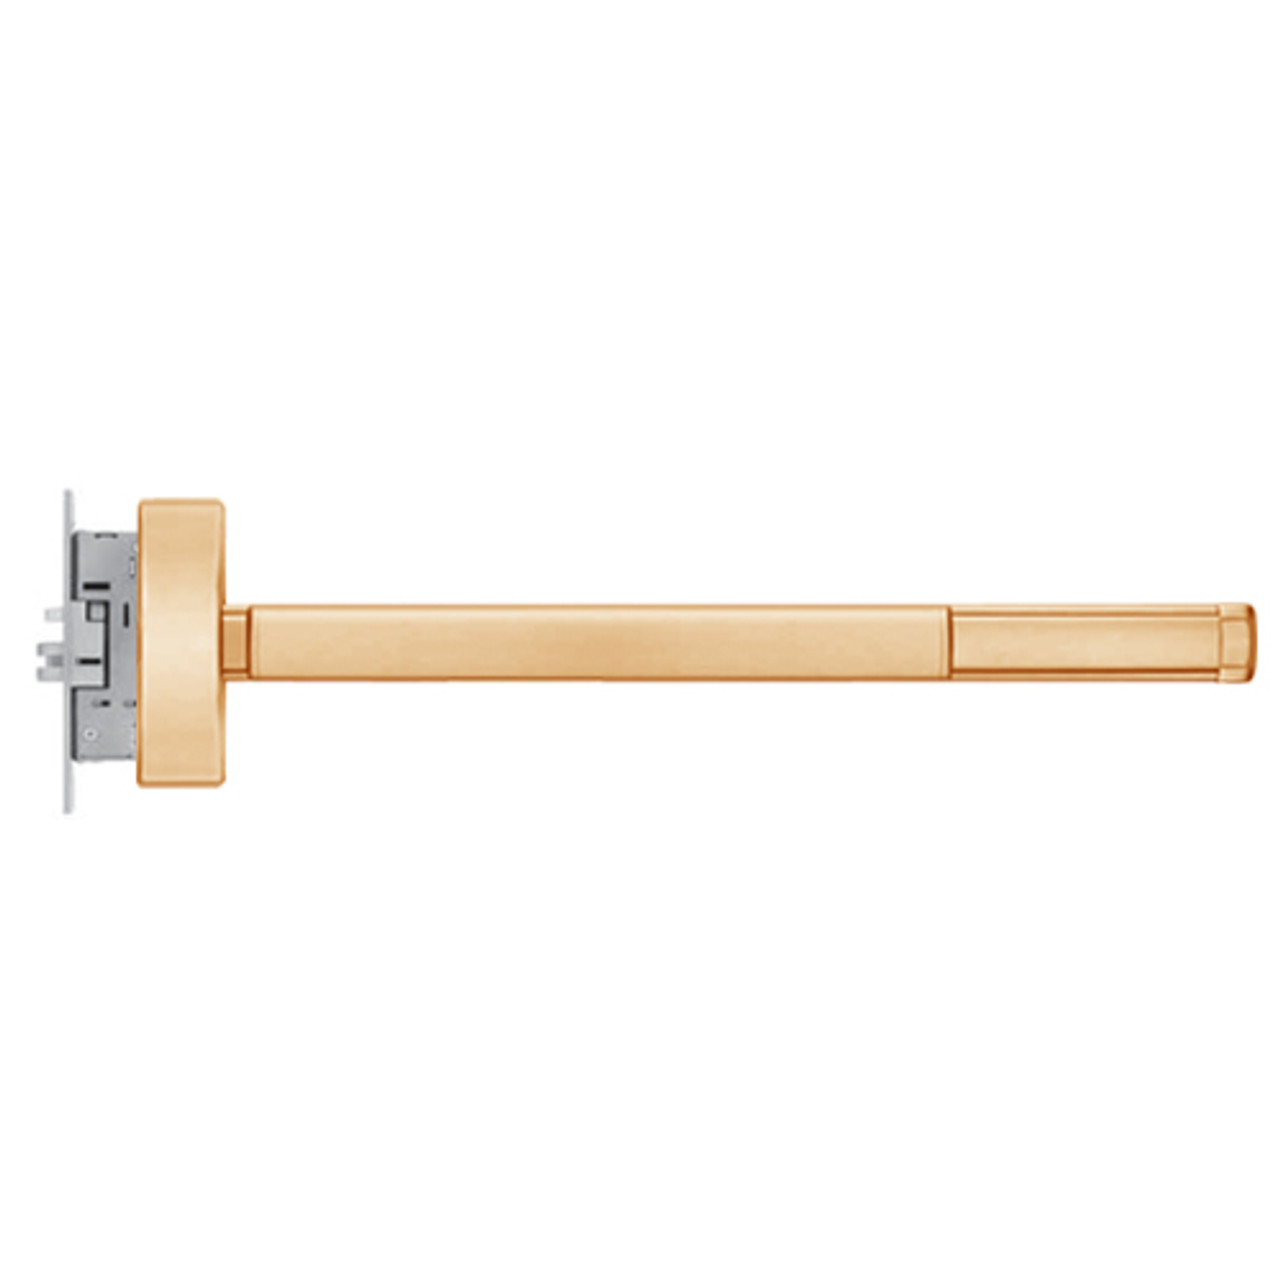 TSFL2301-LHR-612-36 PHI 2300 Series Fire Rated Apex Mortise Exit Device with Touchbar Monitoring Switch Prepped for Cover Plate in Satin Bronze Finish